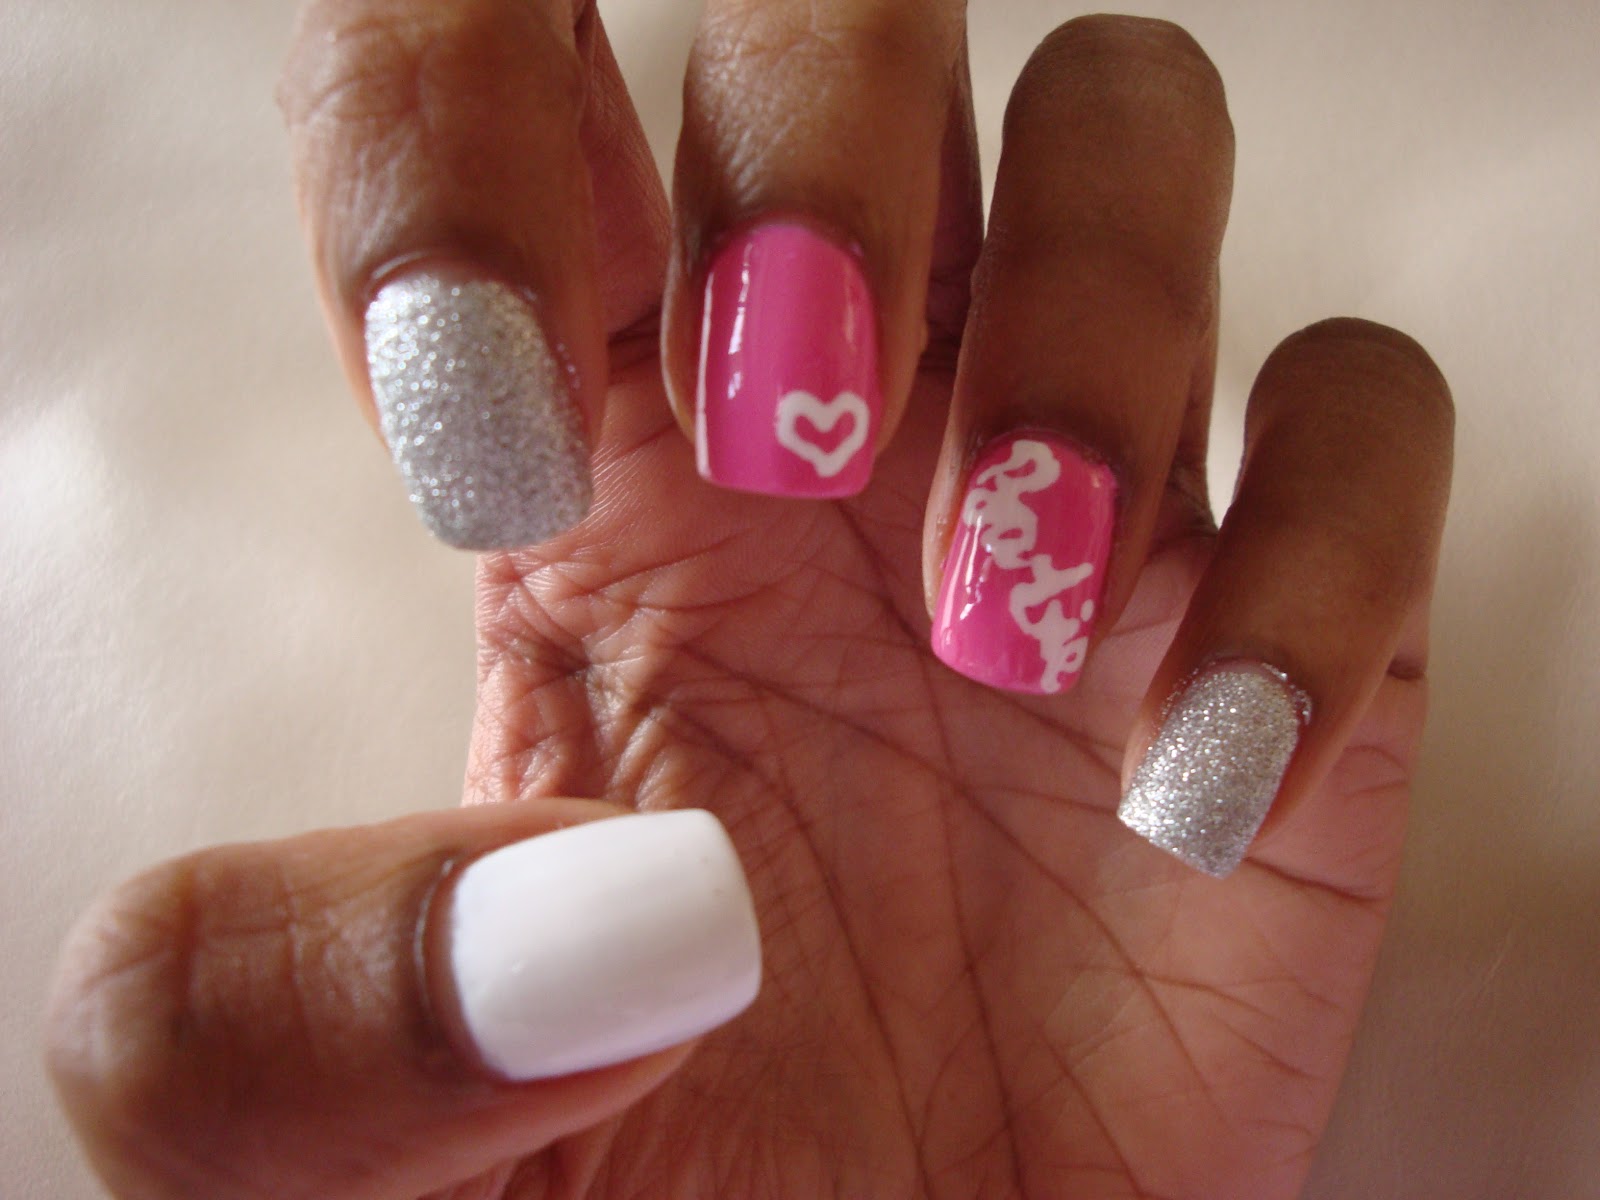 1. Cute Girly Nail Designs - wide 3